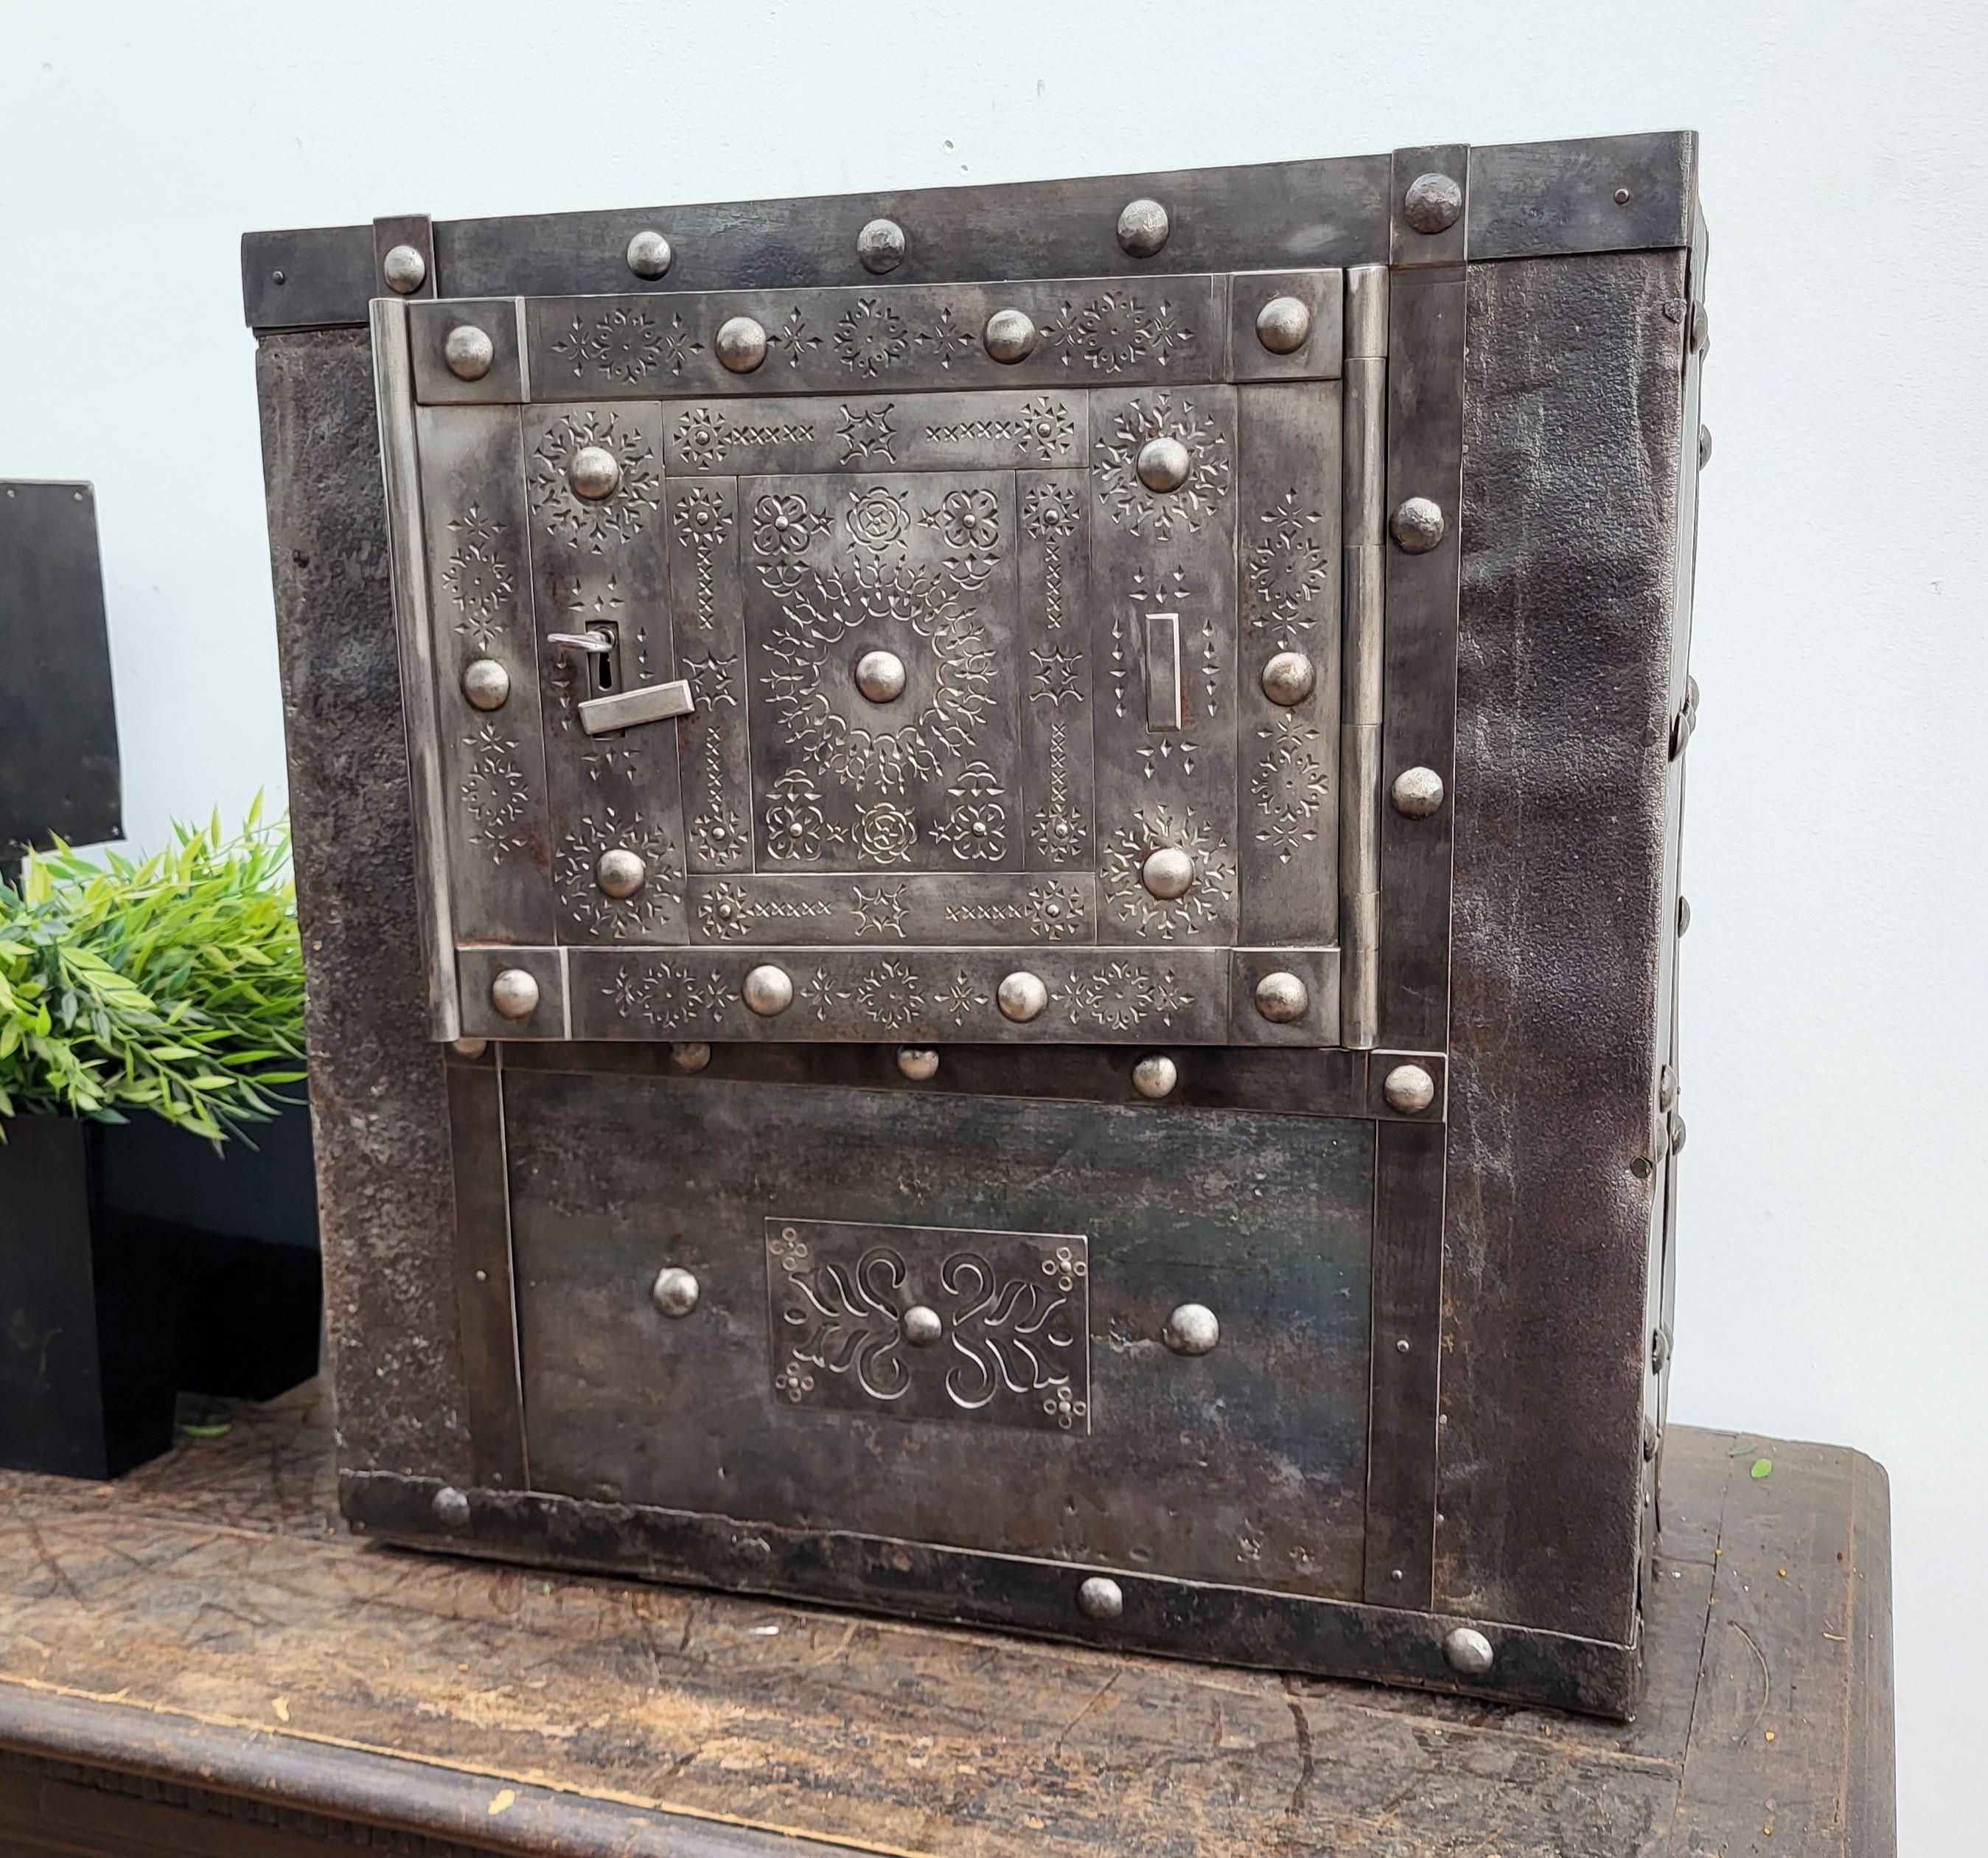 Beautiful and rare example of late 18th century Italian master blacksmith craftsmanship, this antique studded safe with typical all-around hobnails and great wrought iron details, probably from the Piedmont region, has a great metal color with